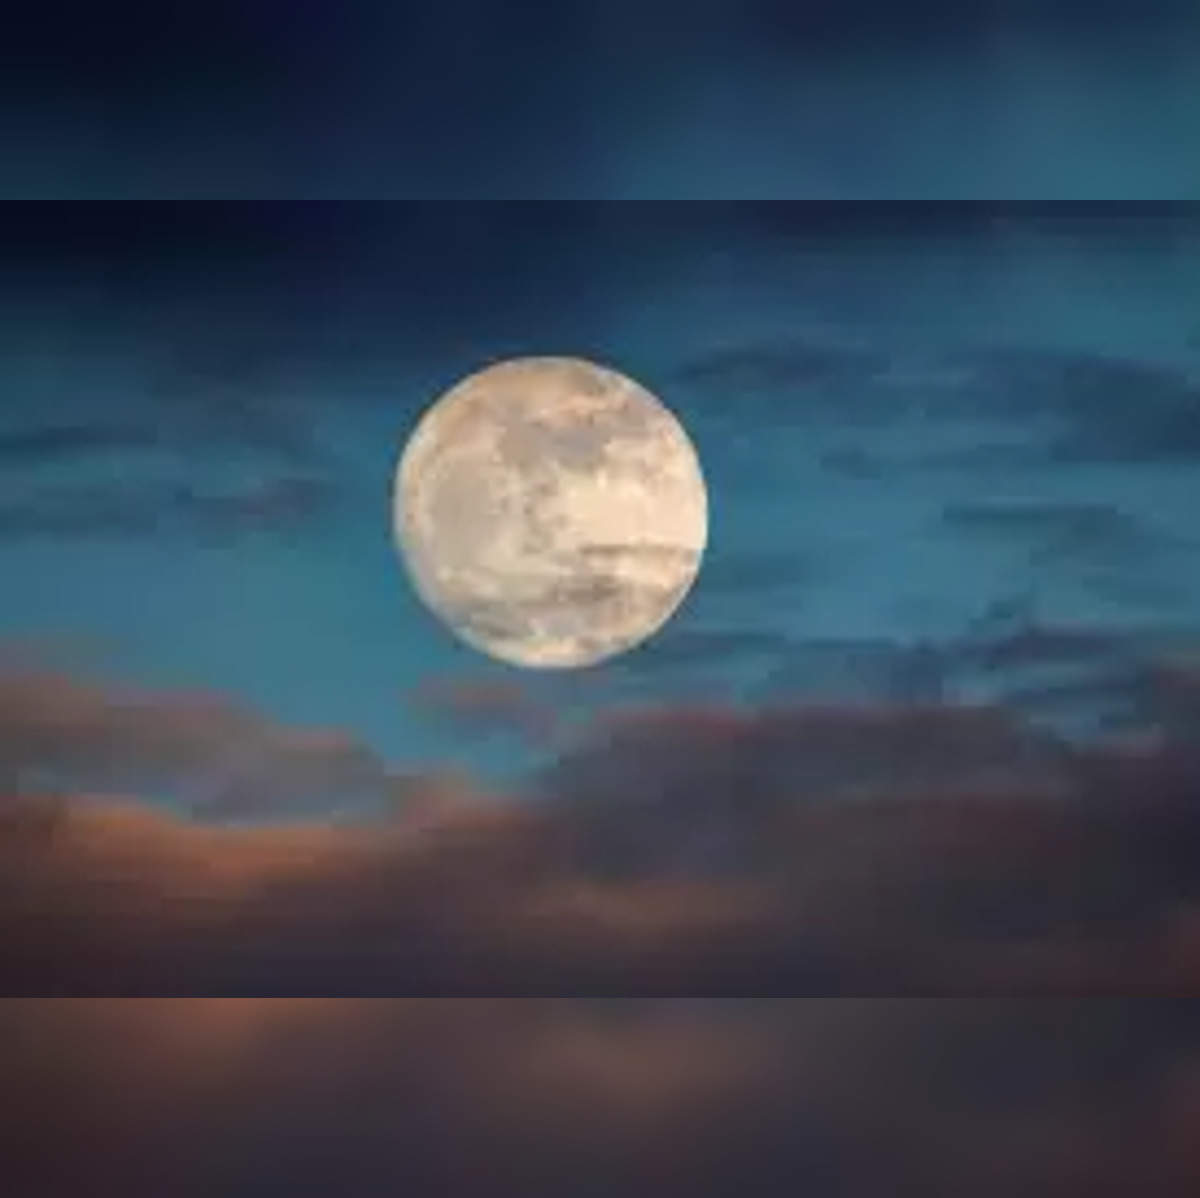 Next full moon: When is the next full moon? Check date, name and